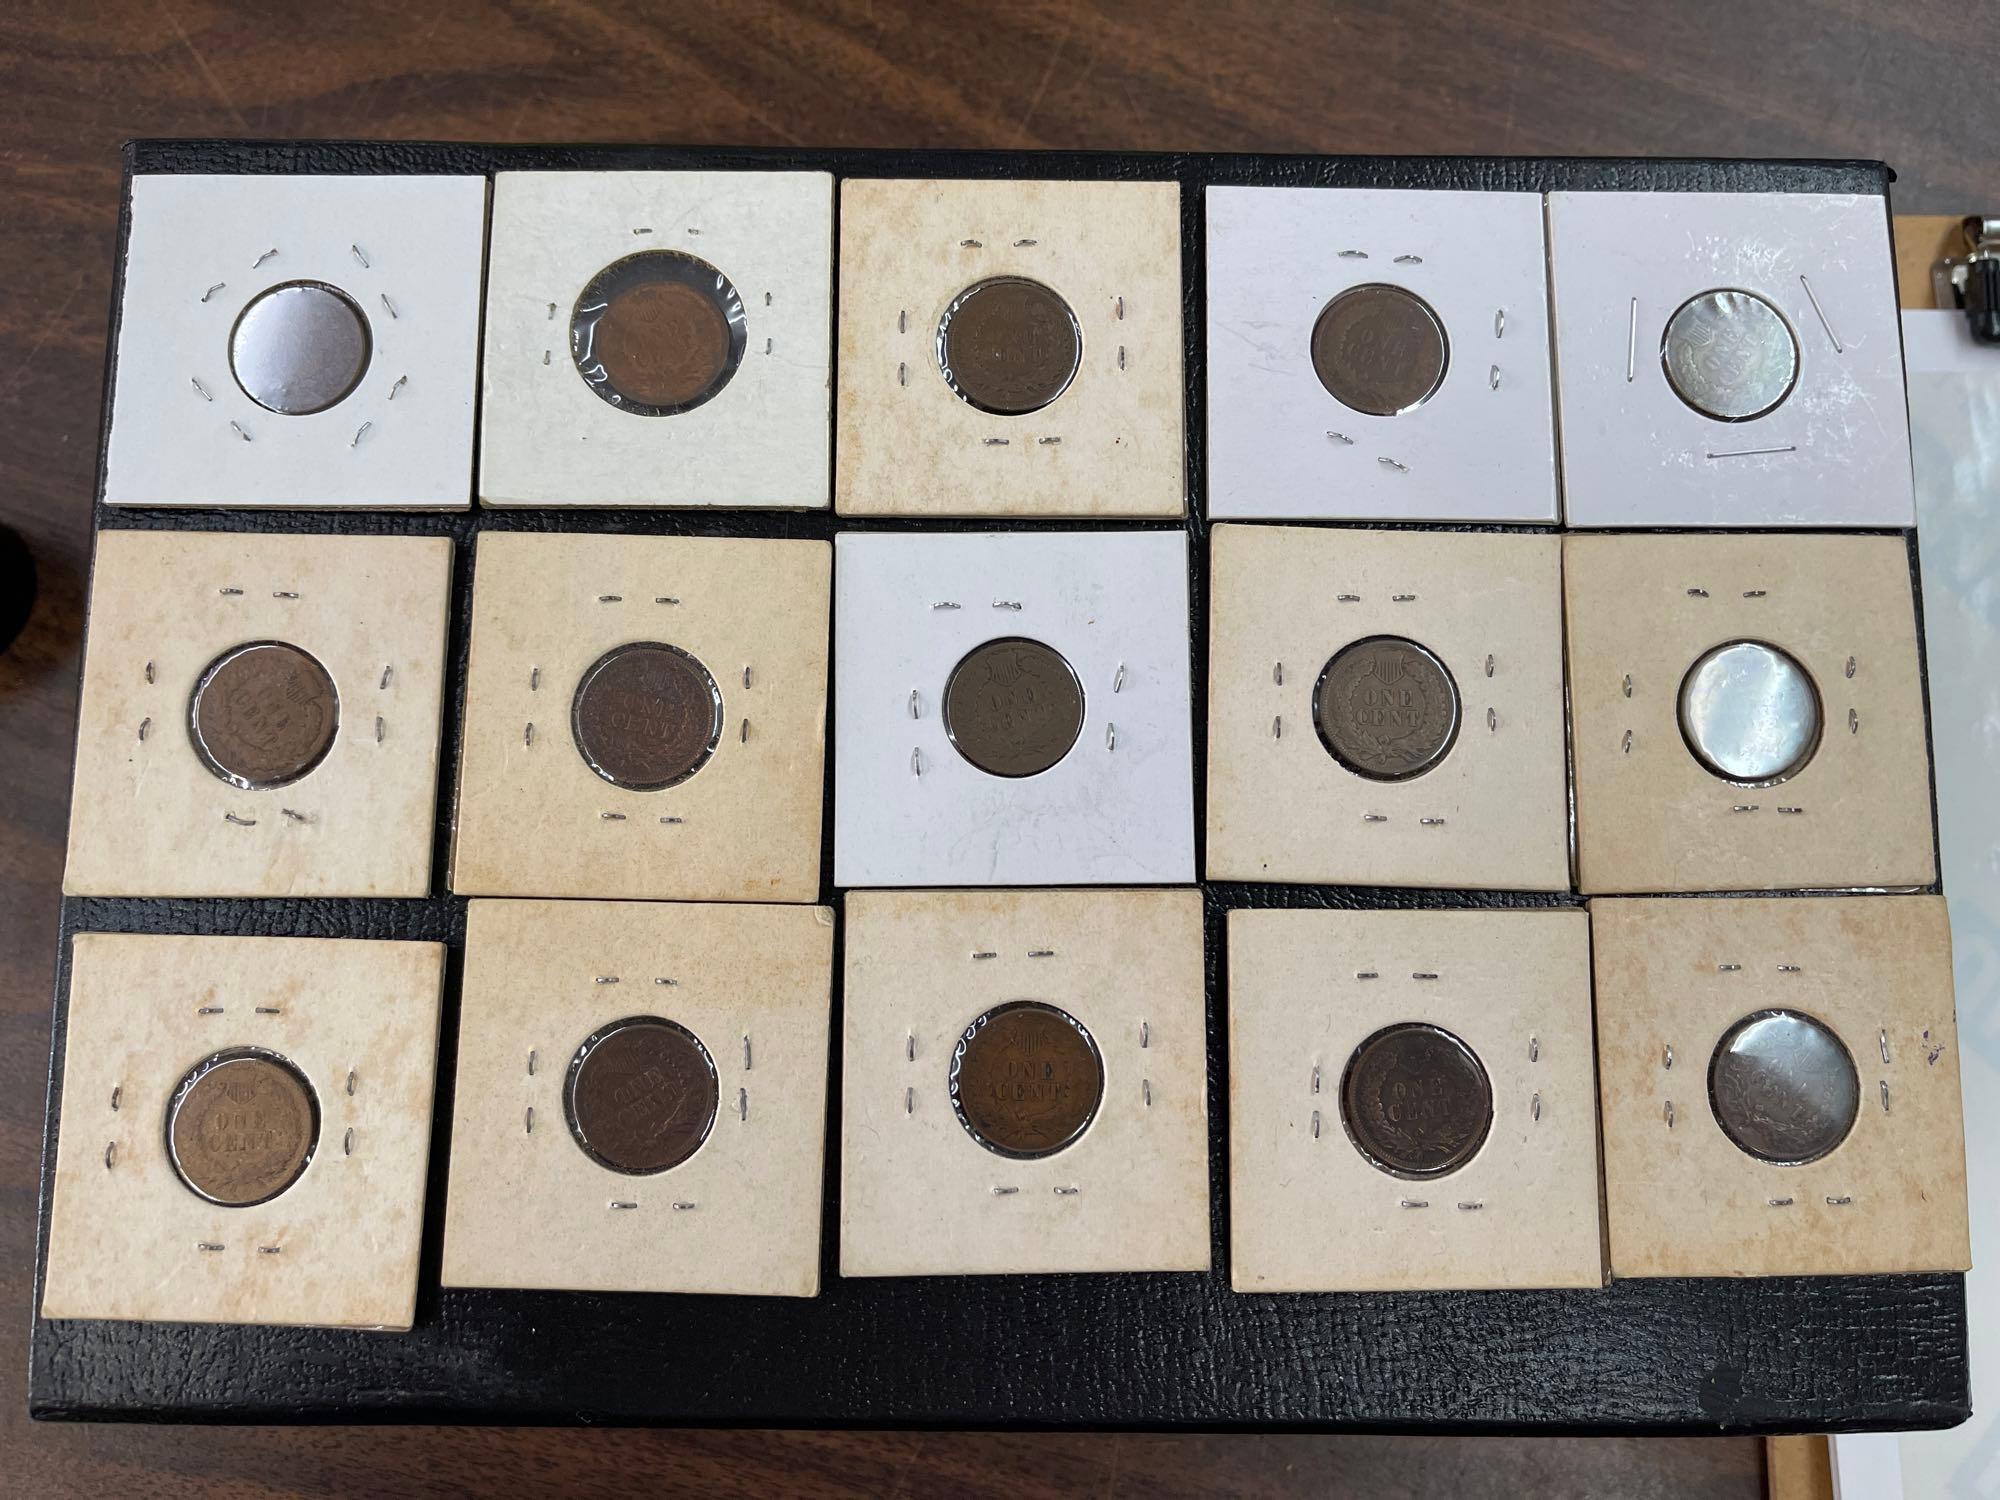 Lot of 15 Indian Head Pennies